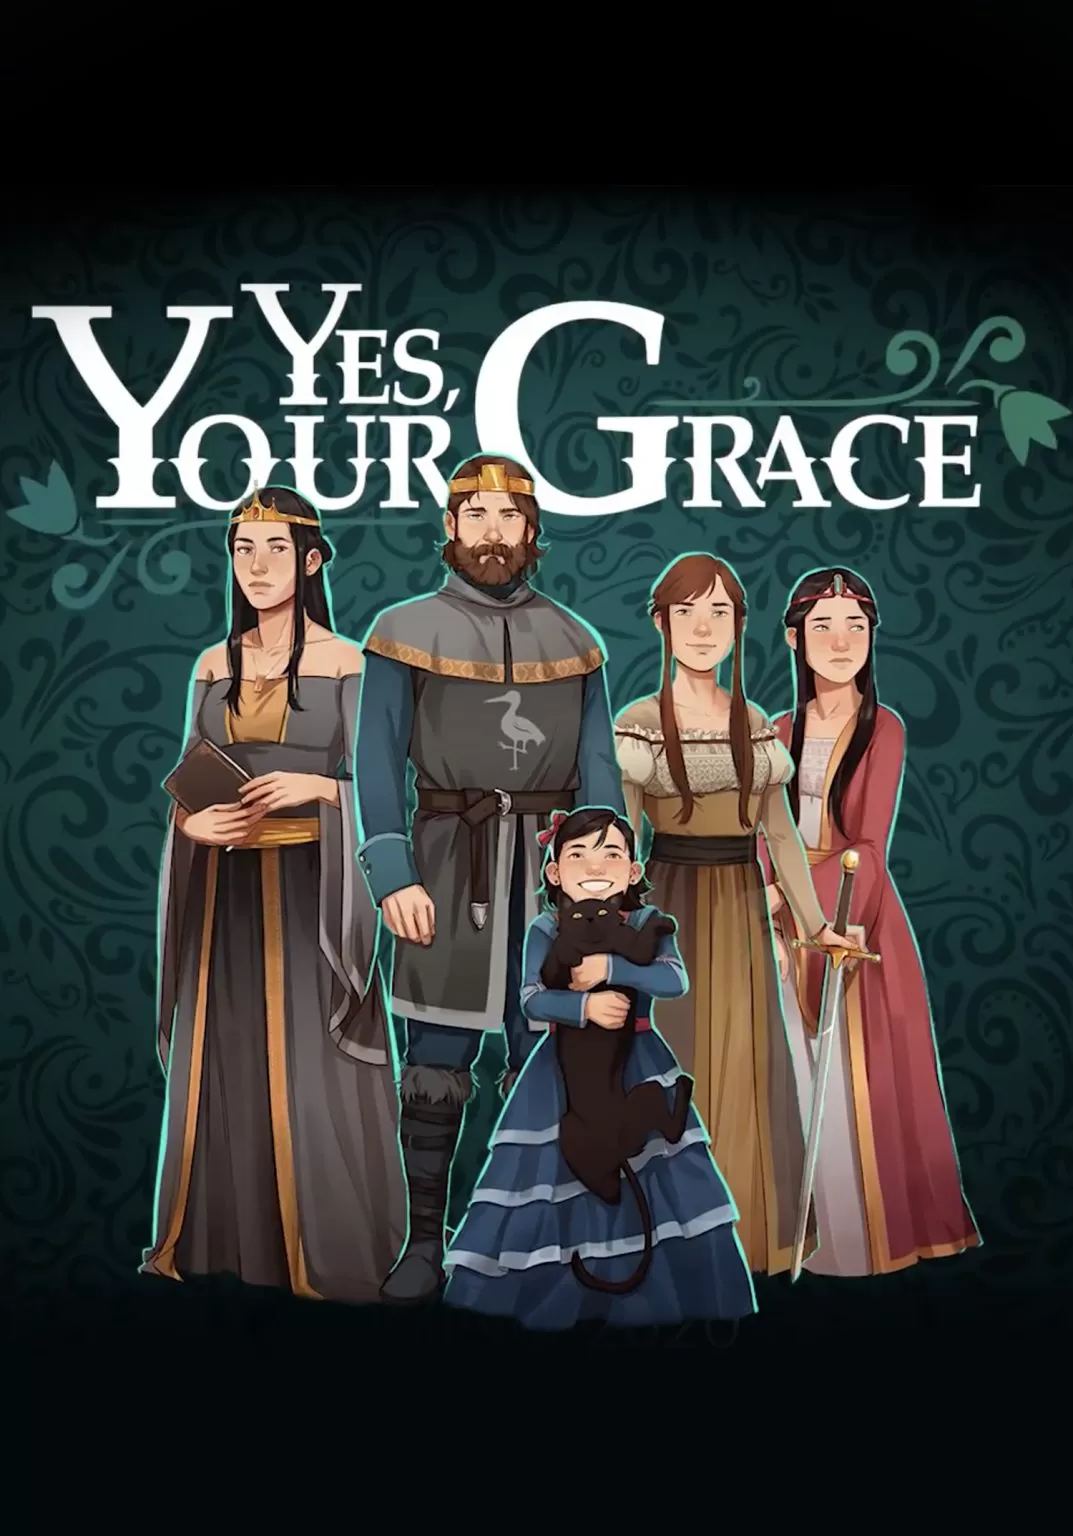 Yes, Your Grace PC Game Download Full Version Free